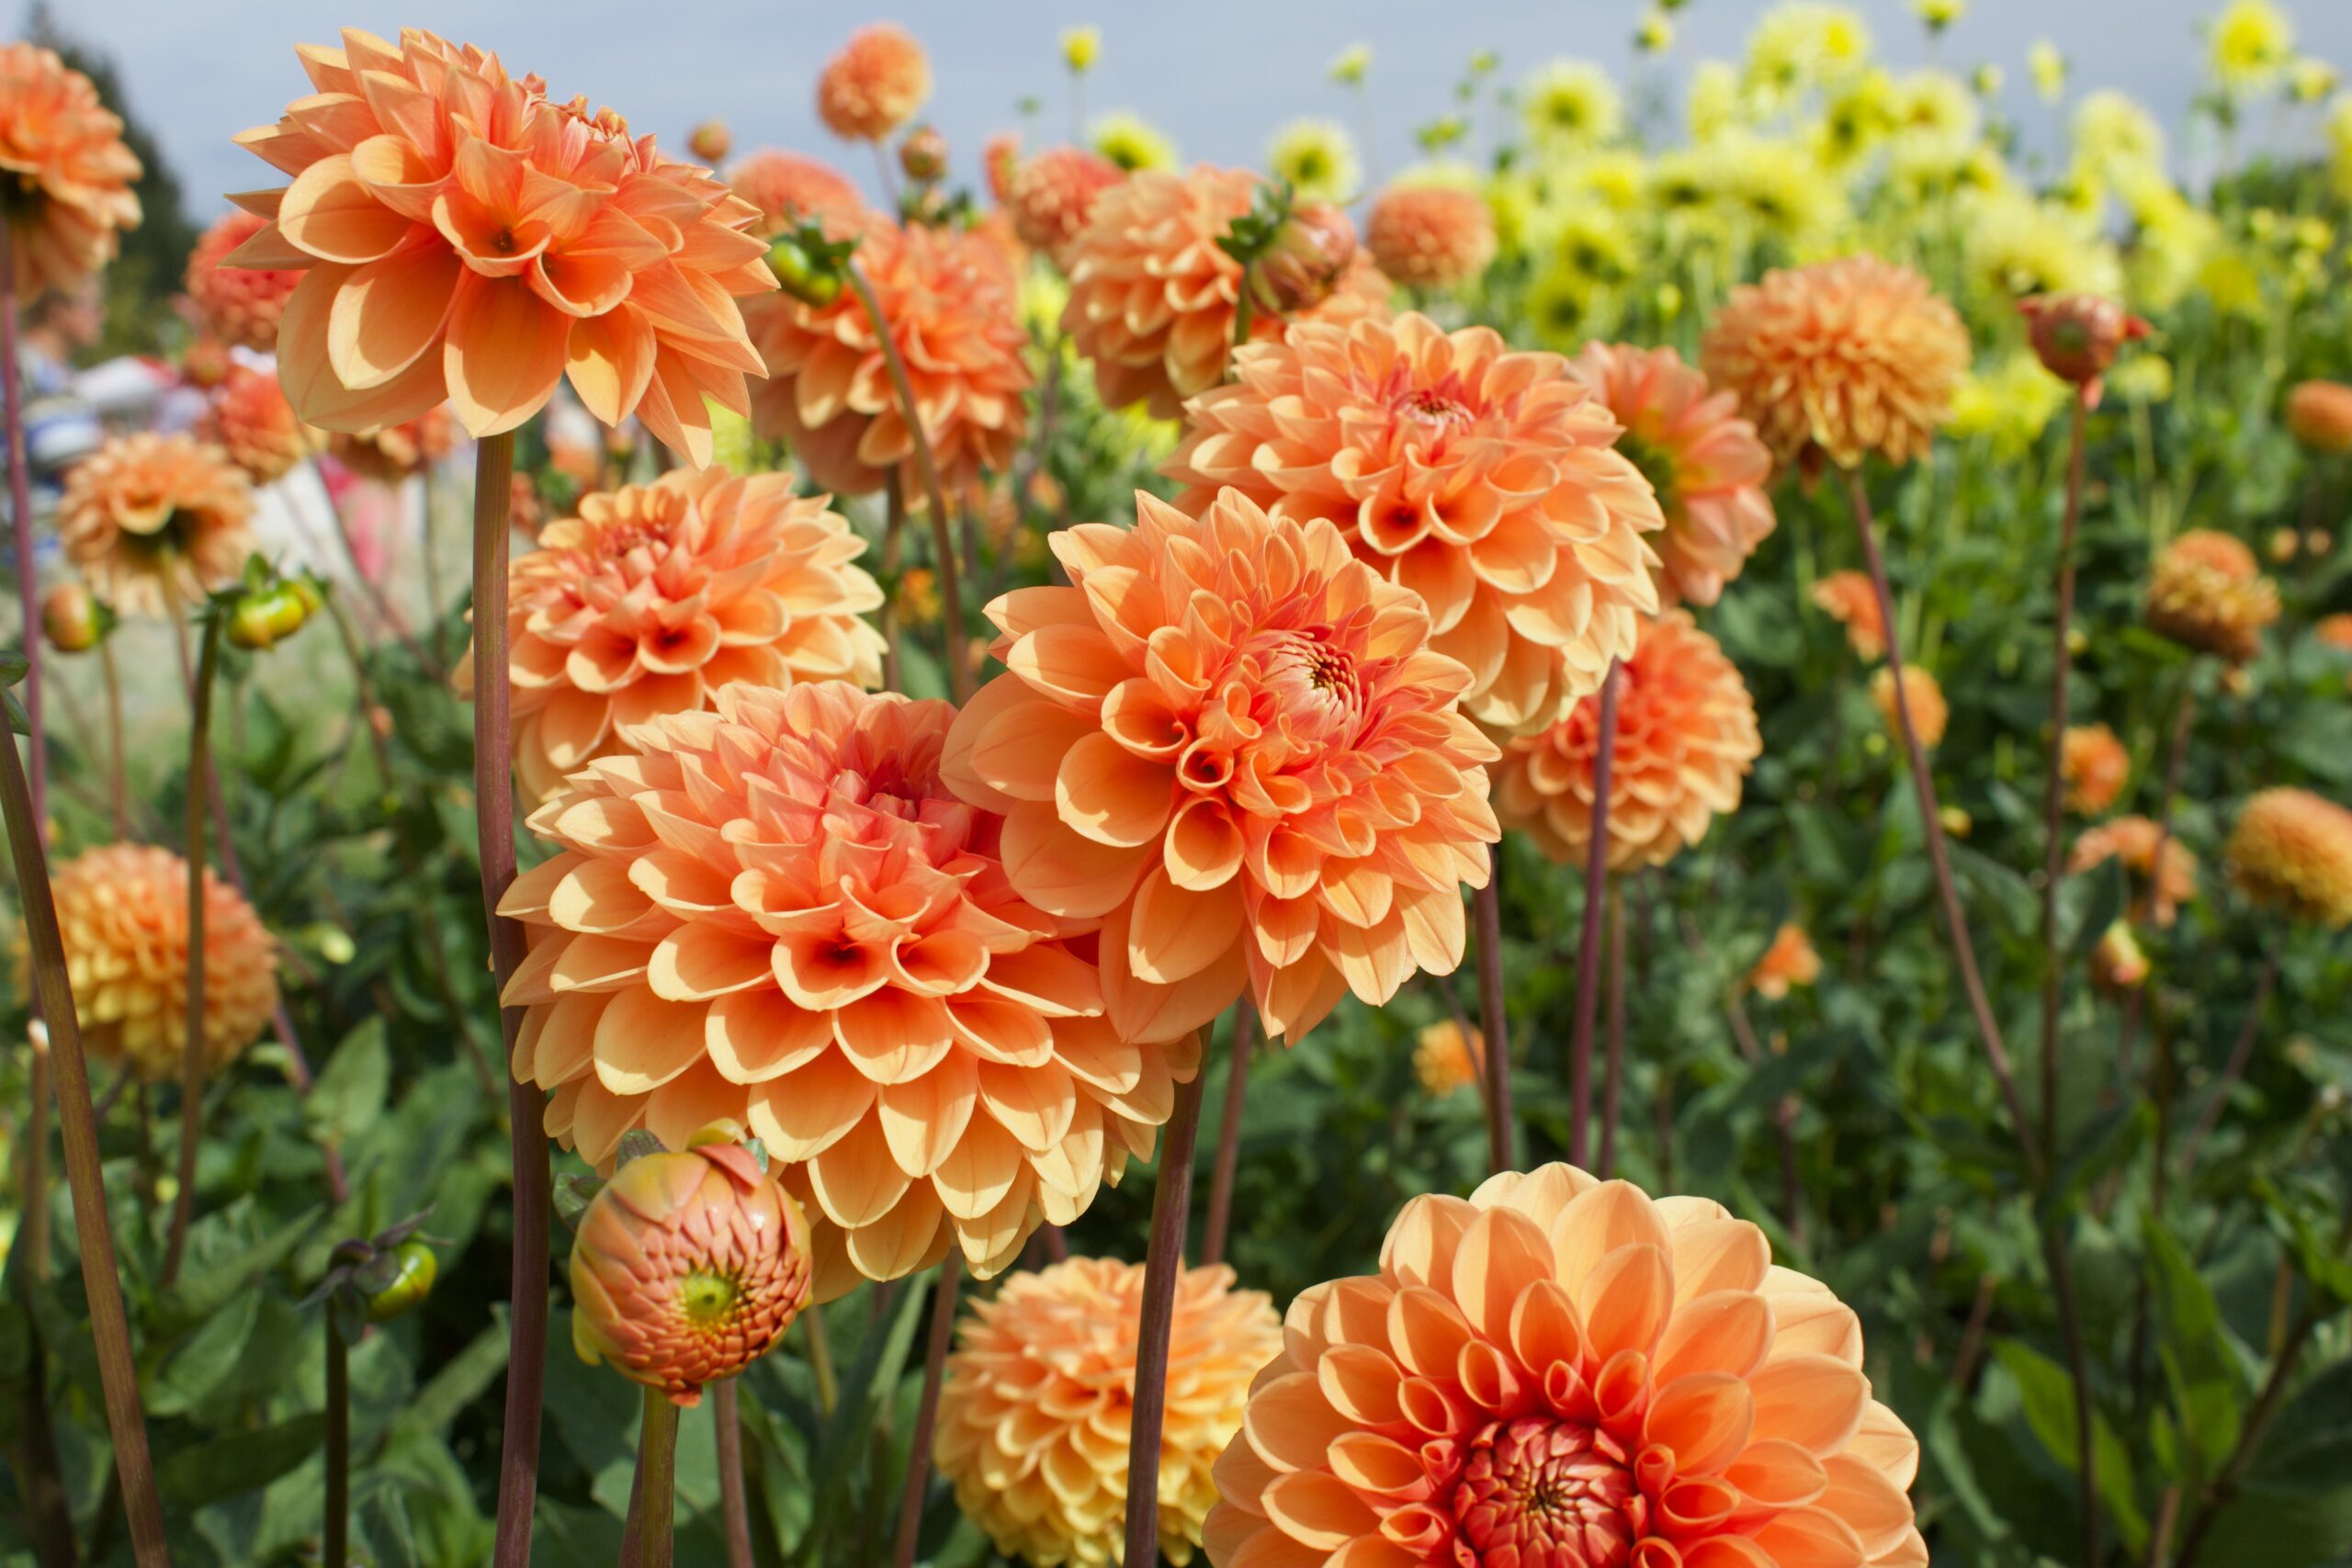 Orange flowers with layers of curled-in petals nearly cover the image. They are growing in a field.